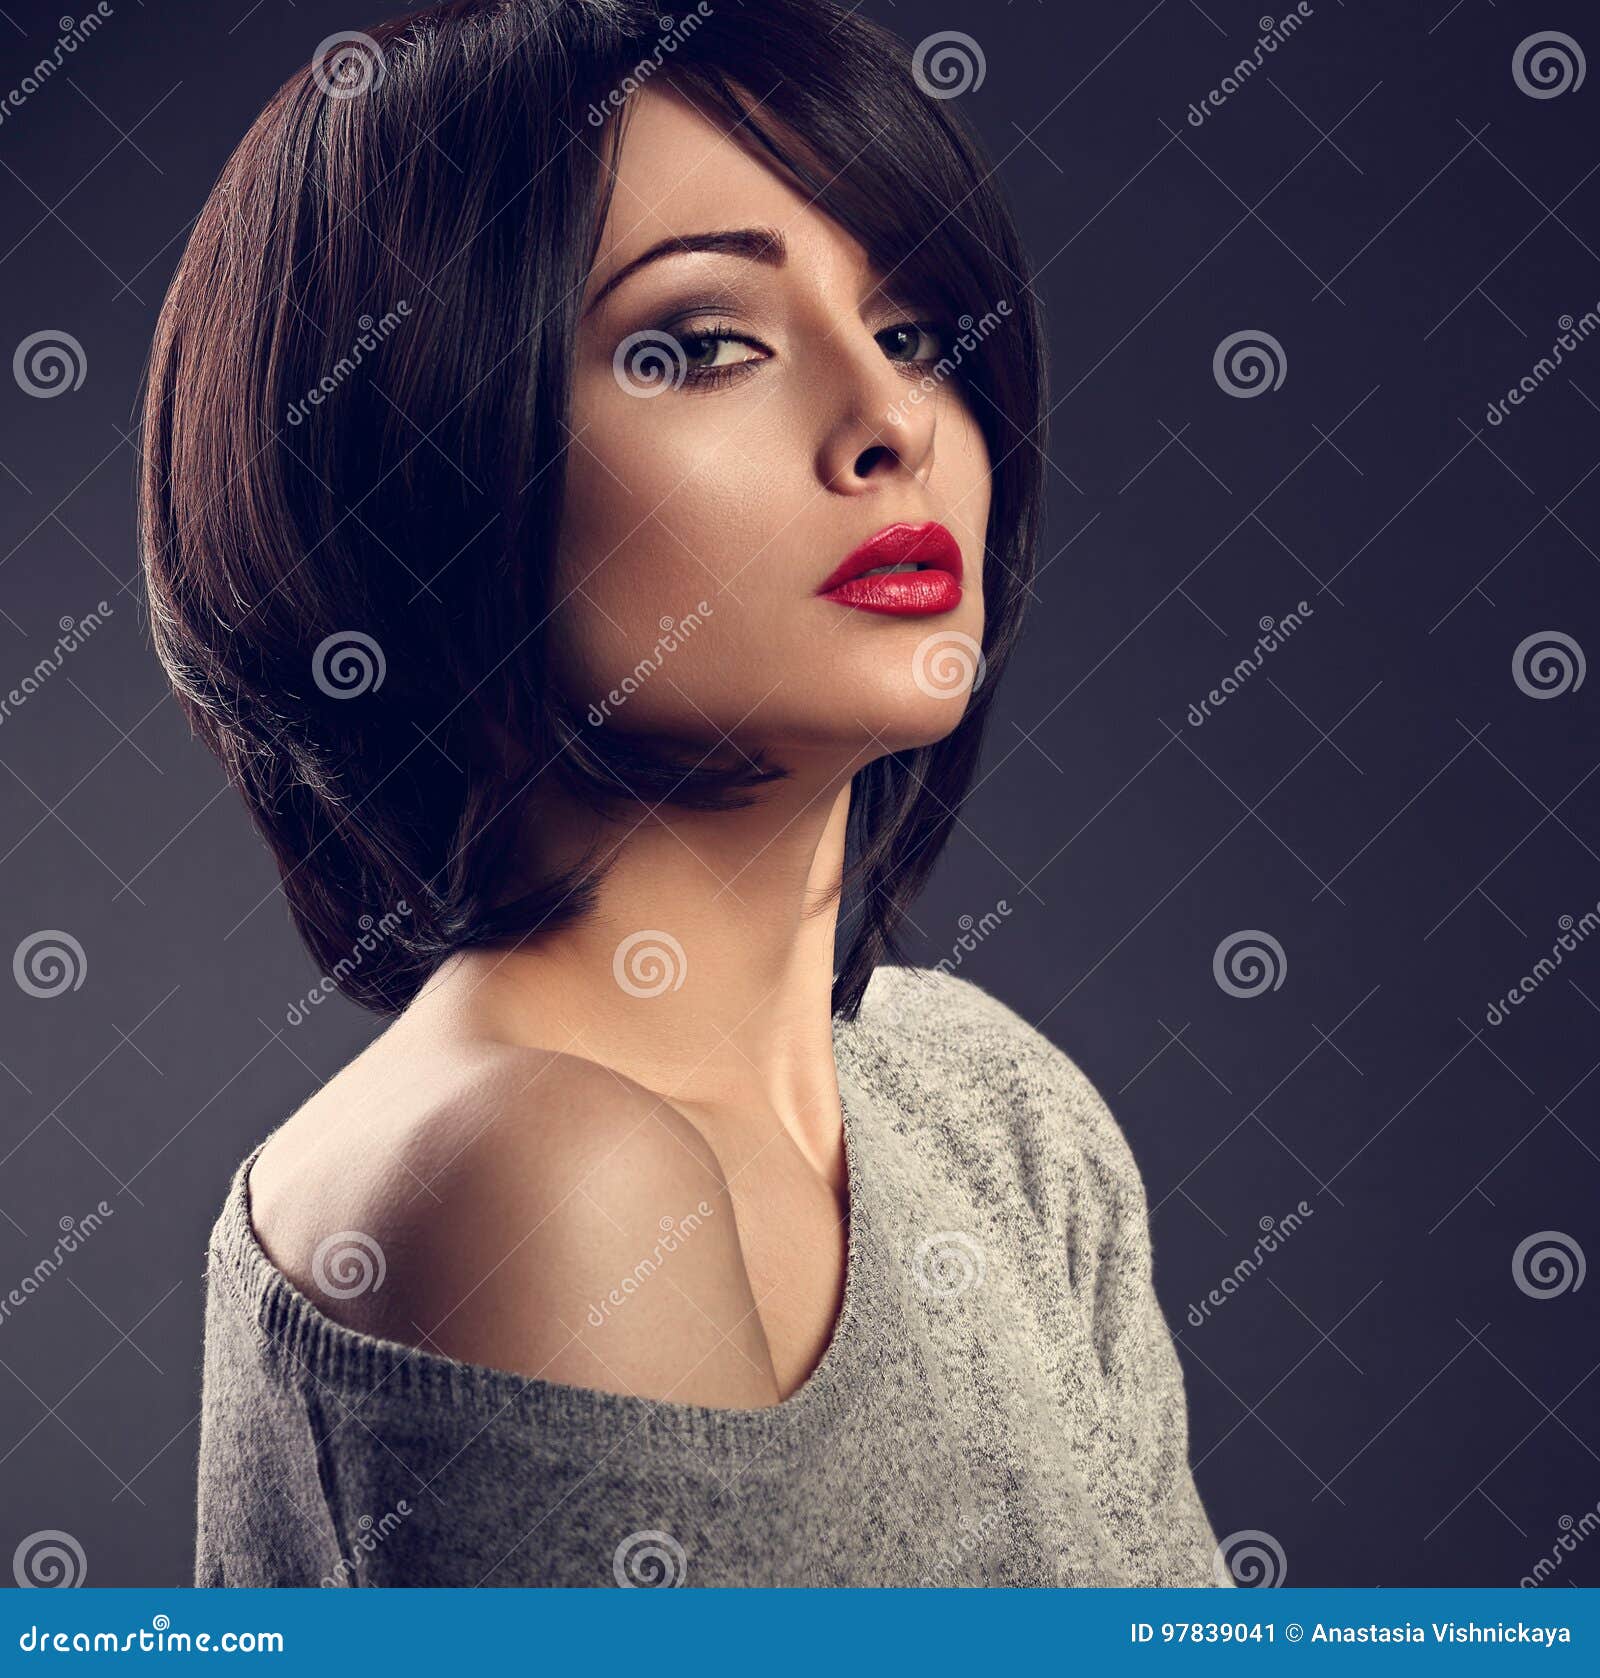 Pictures of hair styles for sexy women